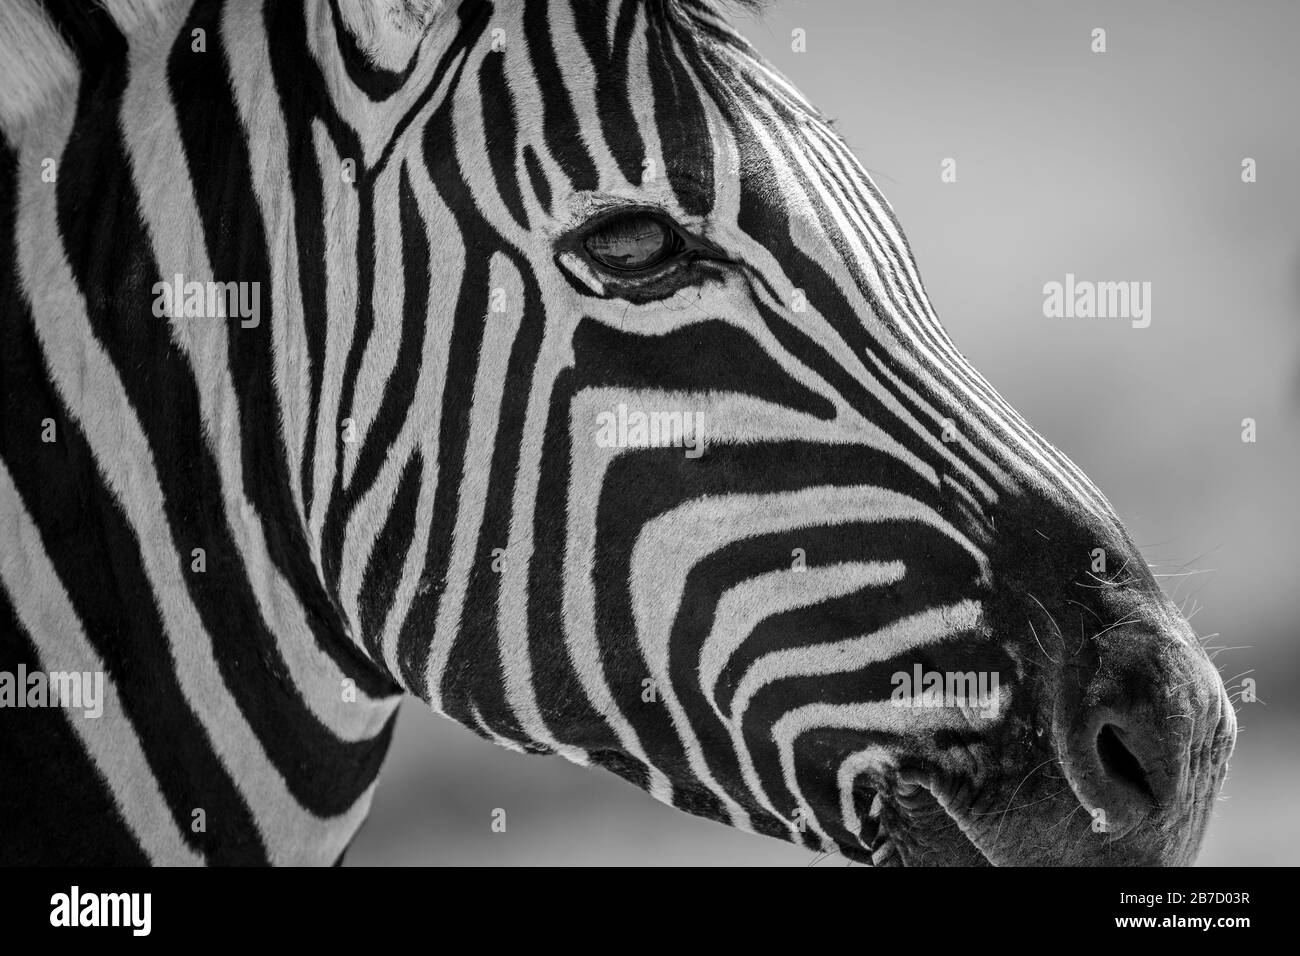 This black and white close up of a zebra's face was taken in the Etosha National Park in Namibia Stock Photo